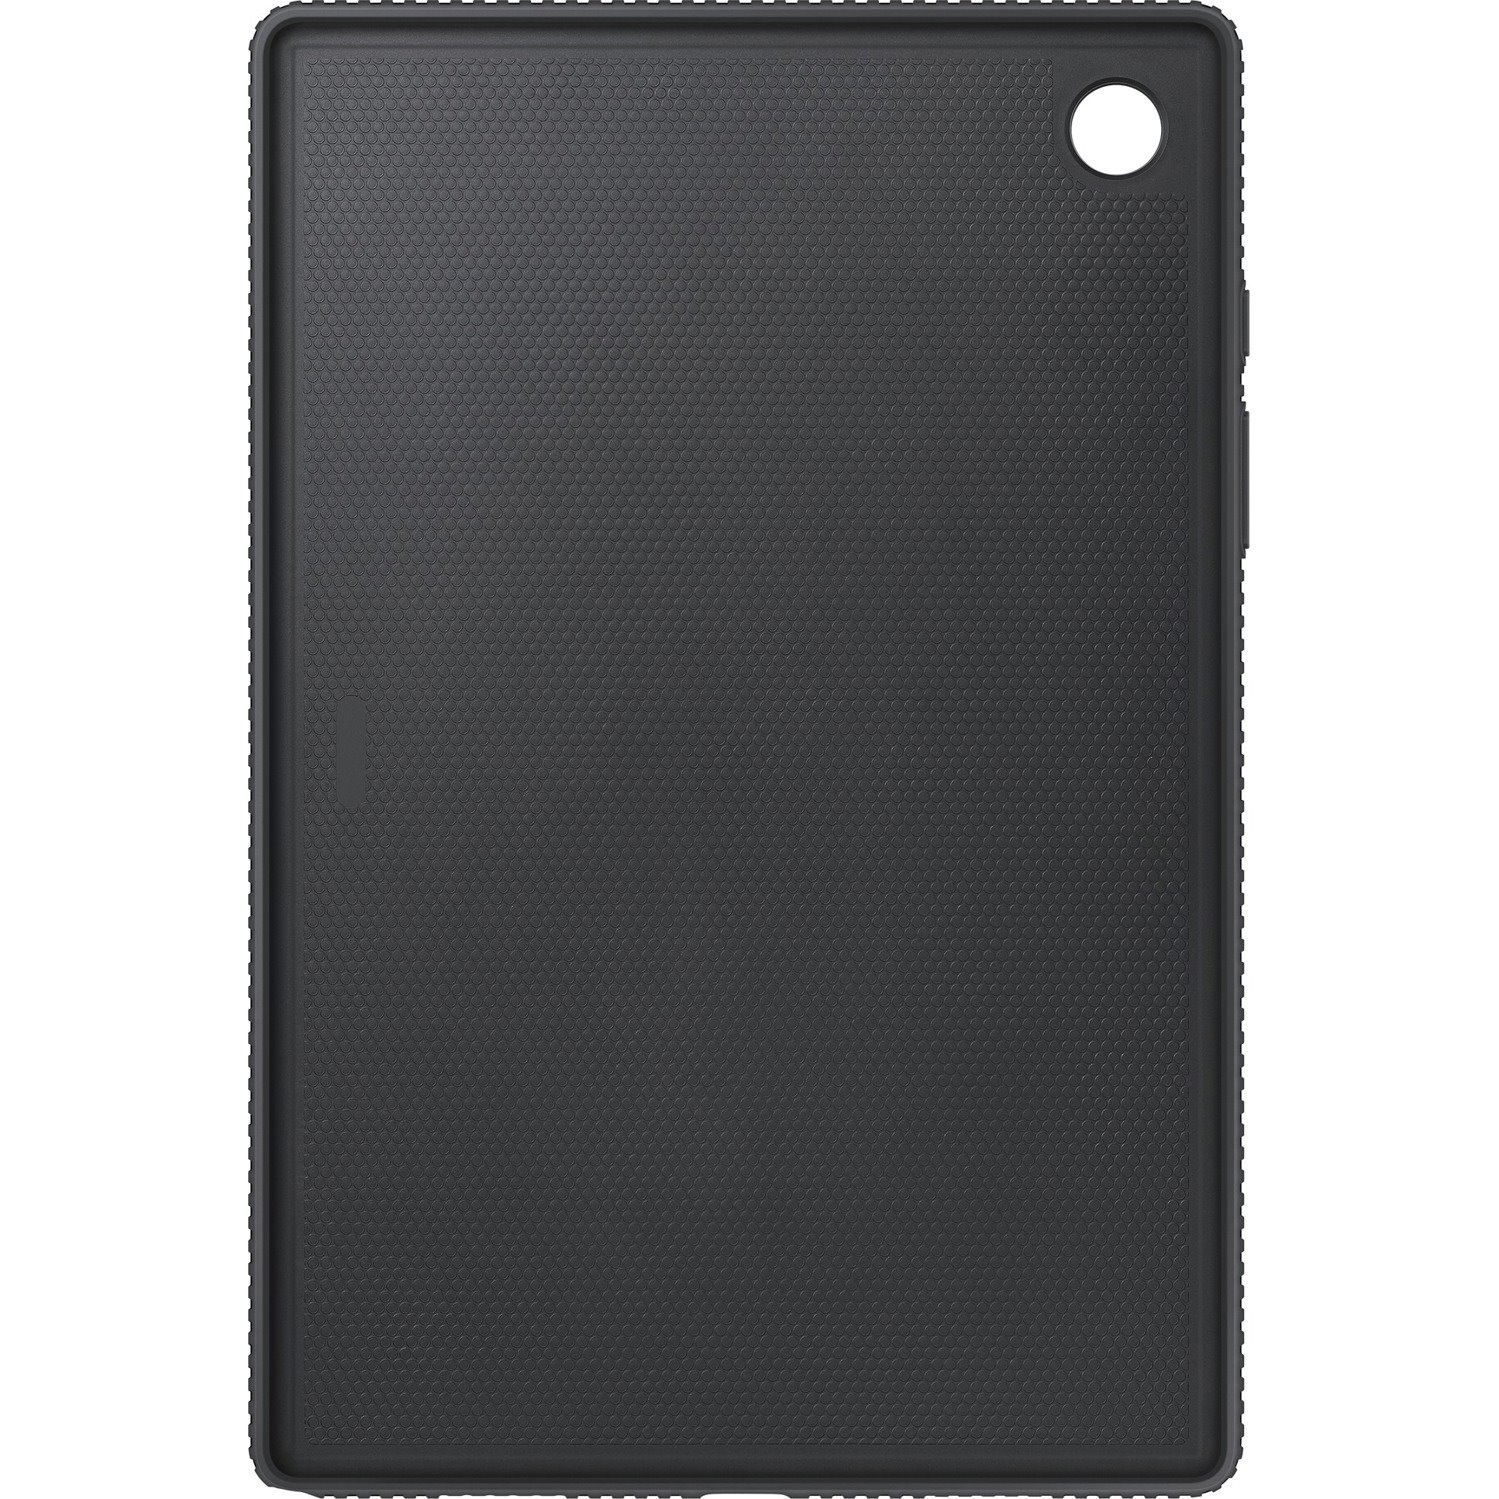 Samsung Galaxy Tab A8 WIFI Protective Cover